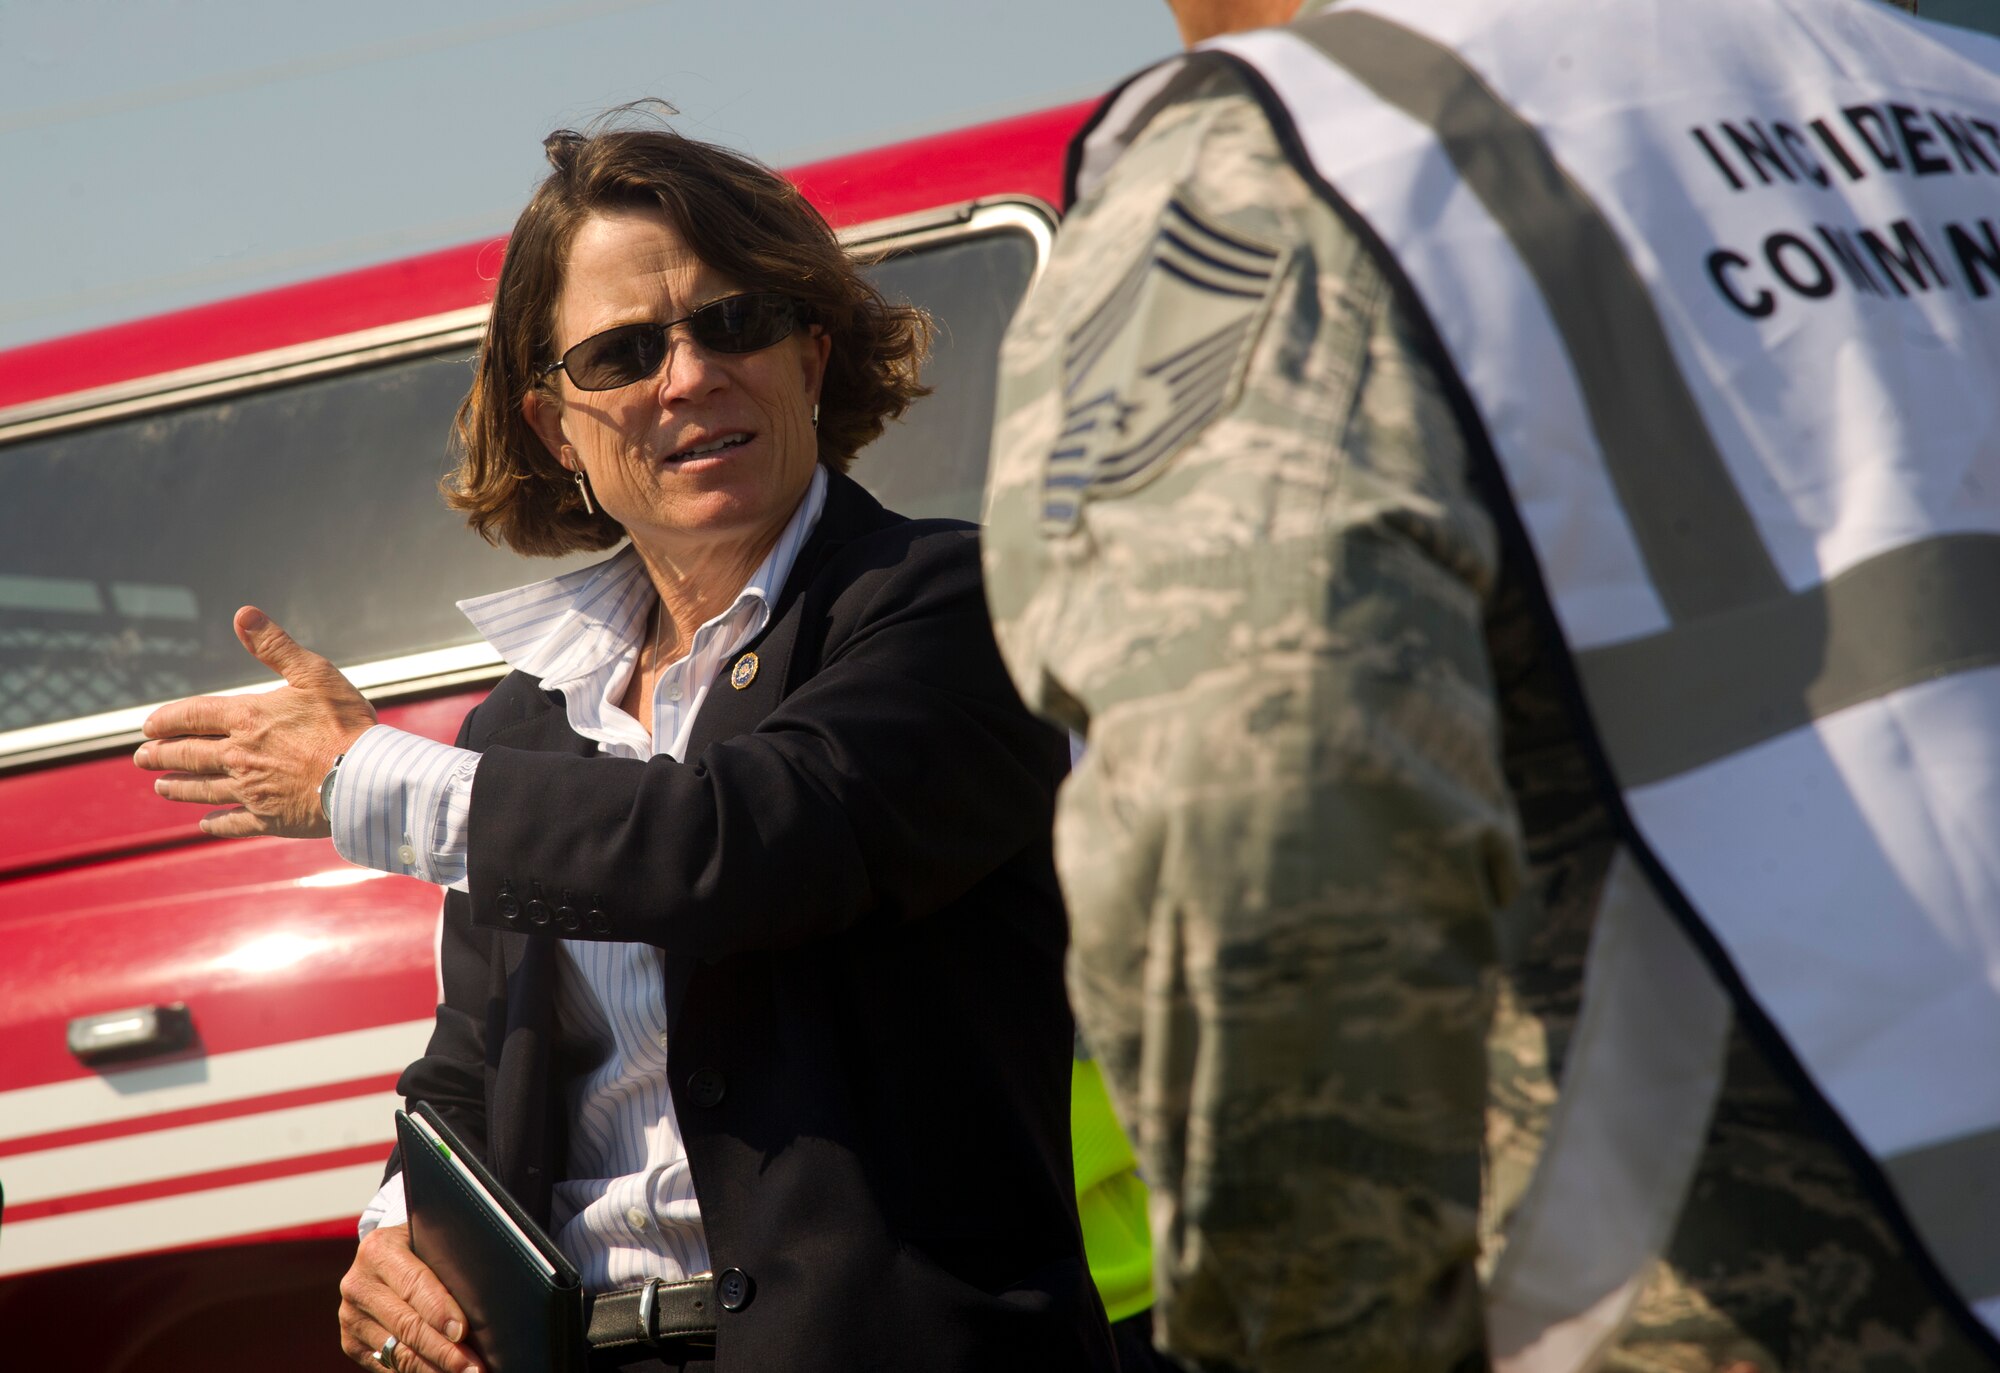 An agent from the Federal Bureau of Investigations speaks with the incident commander during a field training exercise at Minot Air Force Base, N.D., Aug. 20, 2013. The purpose of the exercise was to evaluate and validate the integration and response of emergency management, security forces, fire department, medical and missile field operations to an incident. (U.S. Air Force photo/Senior Airman Brittany Y. Auld)